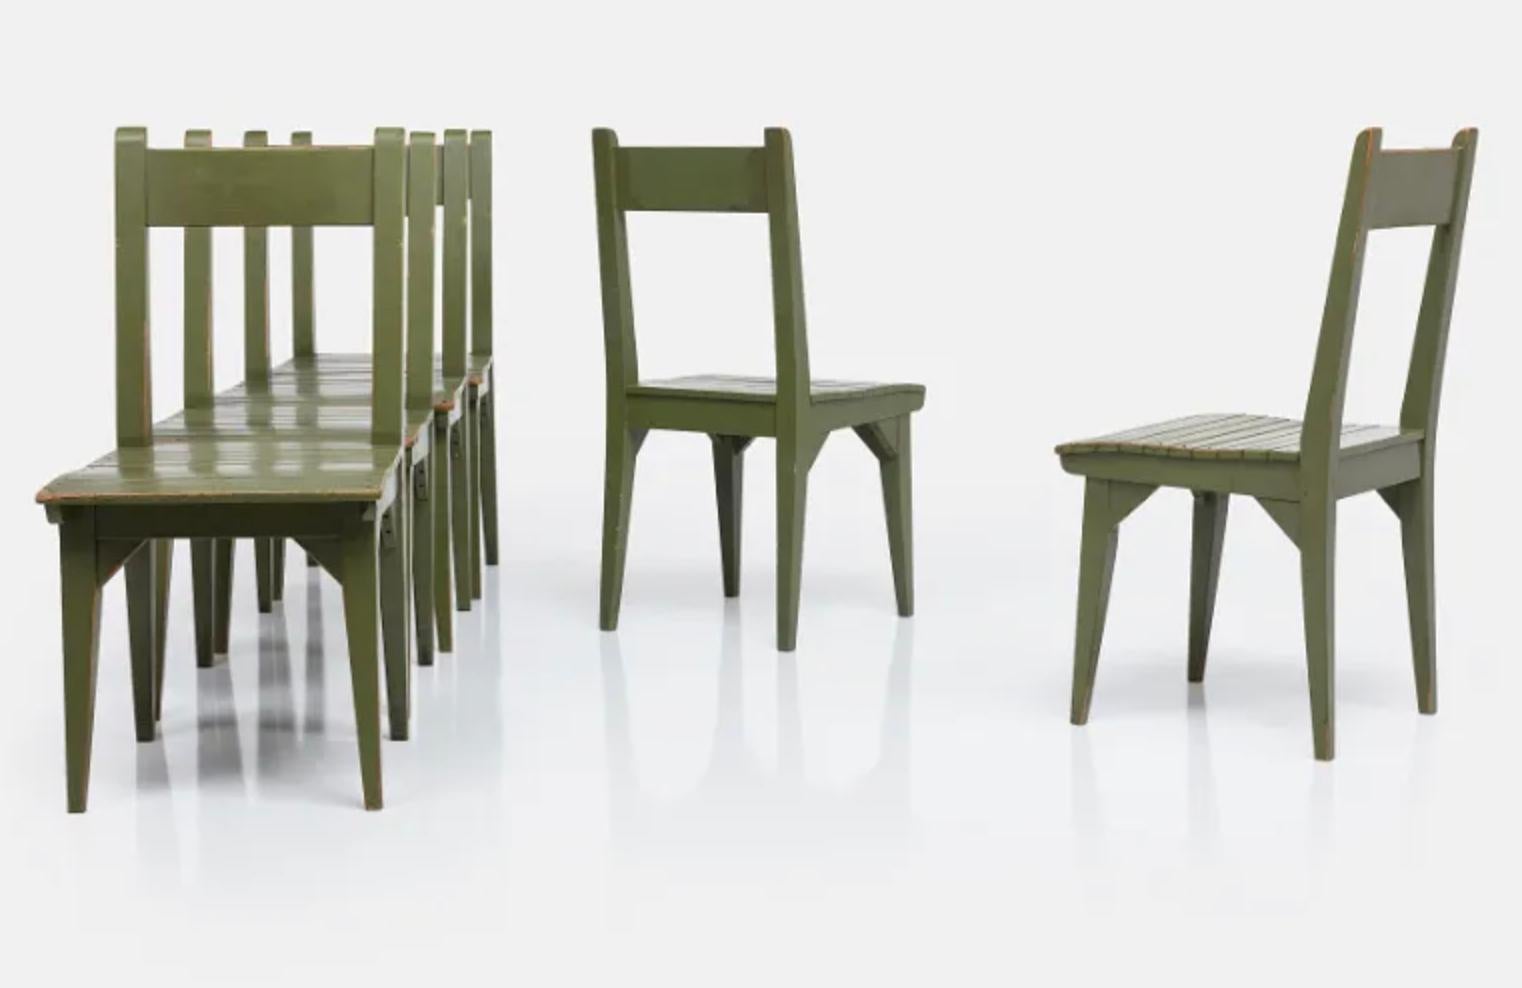 Roy McMakin Painted Wood Postmodern Dining Chair, Green, 1982, USA. For Sale 1